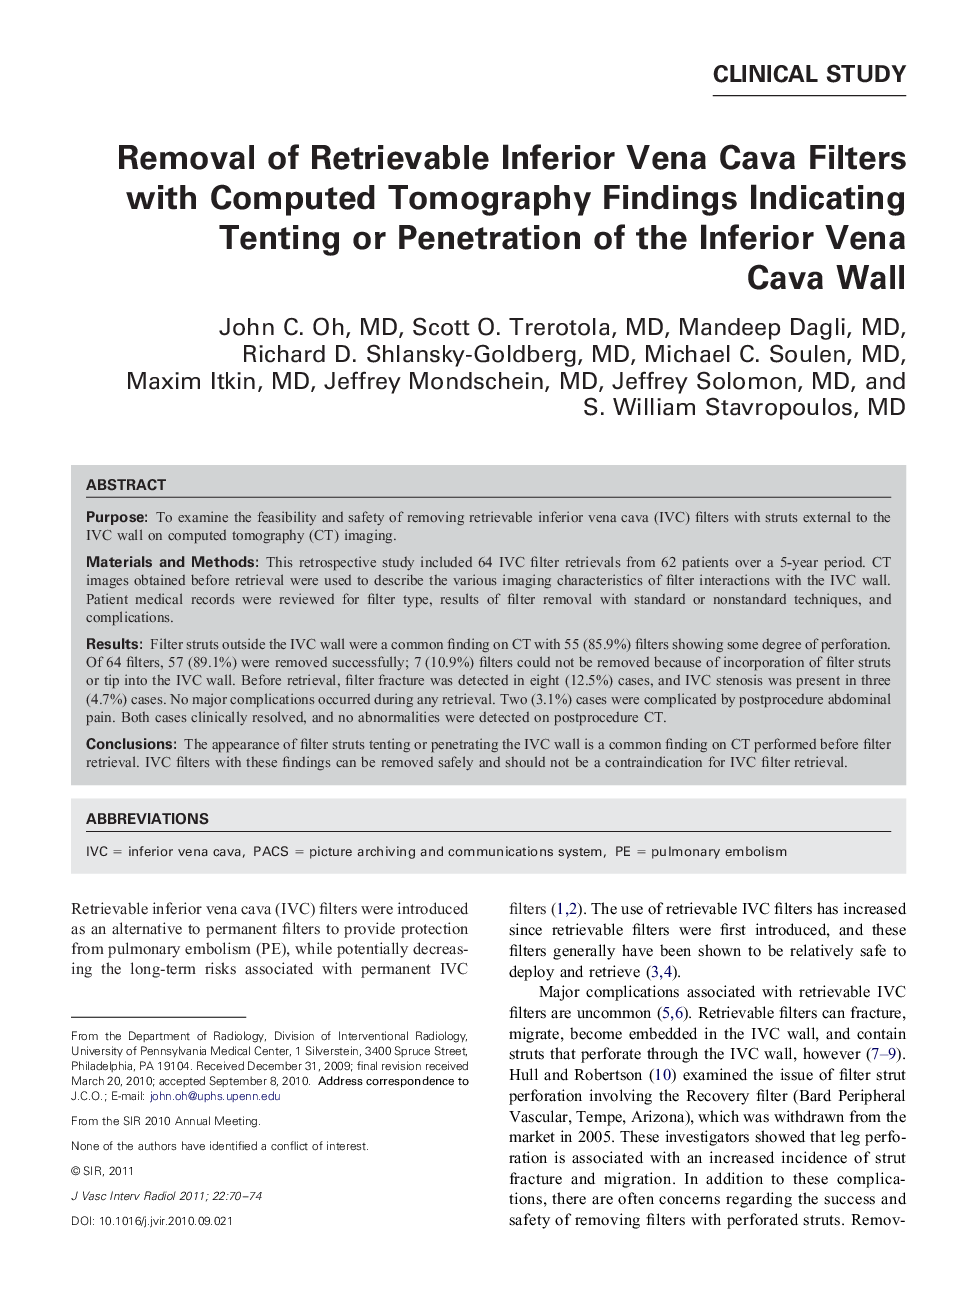 Removal of Retrievable Inferior Vena Cava Filters with Computed Tomography Findings Indicating Tenting or Penetration of the Inferior Vena Cava Wall